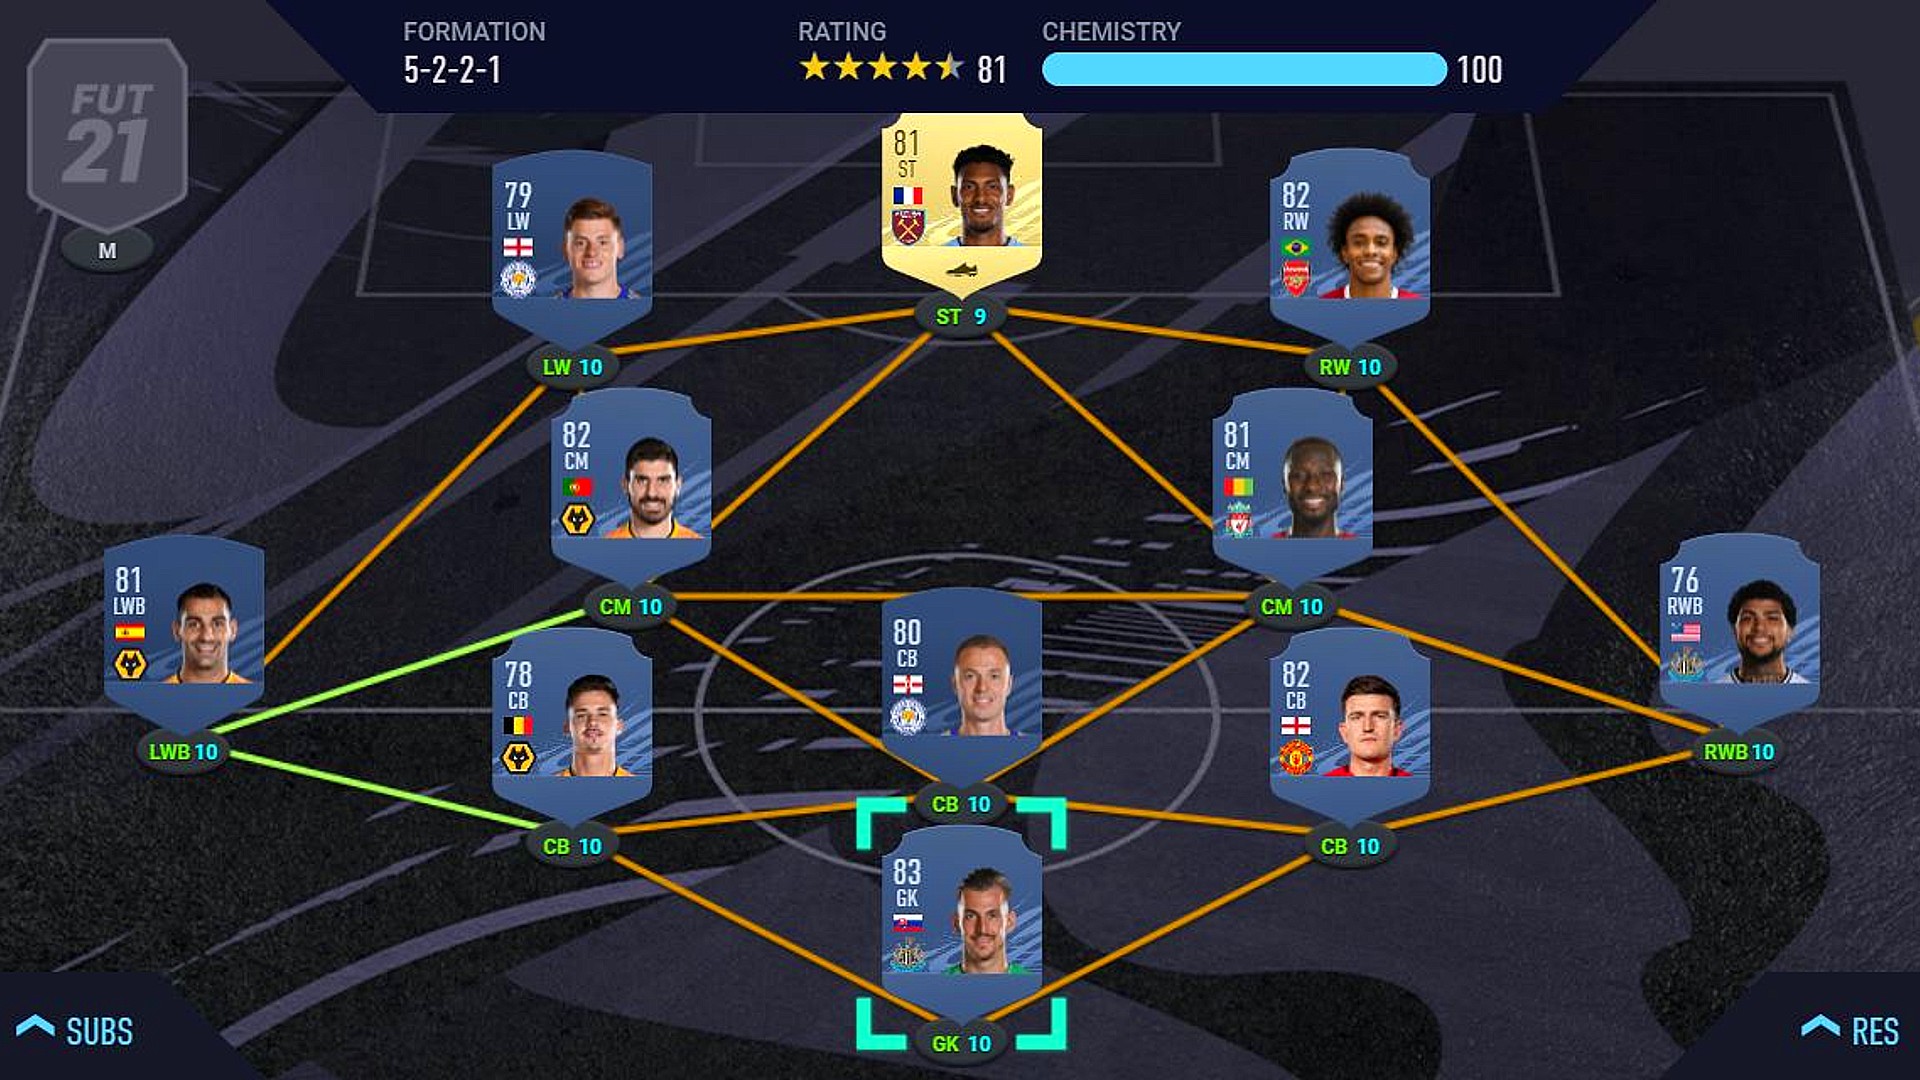 FIFA 21 Around the World SBC: A team formation in the setup screen with 100 Chemistry. 